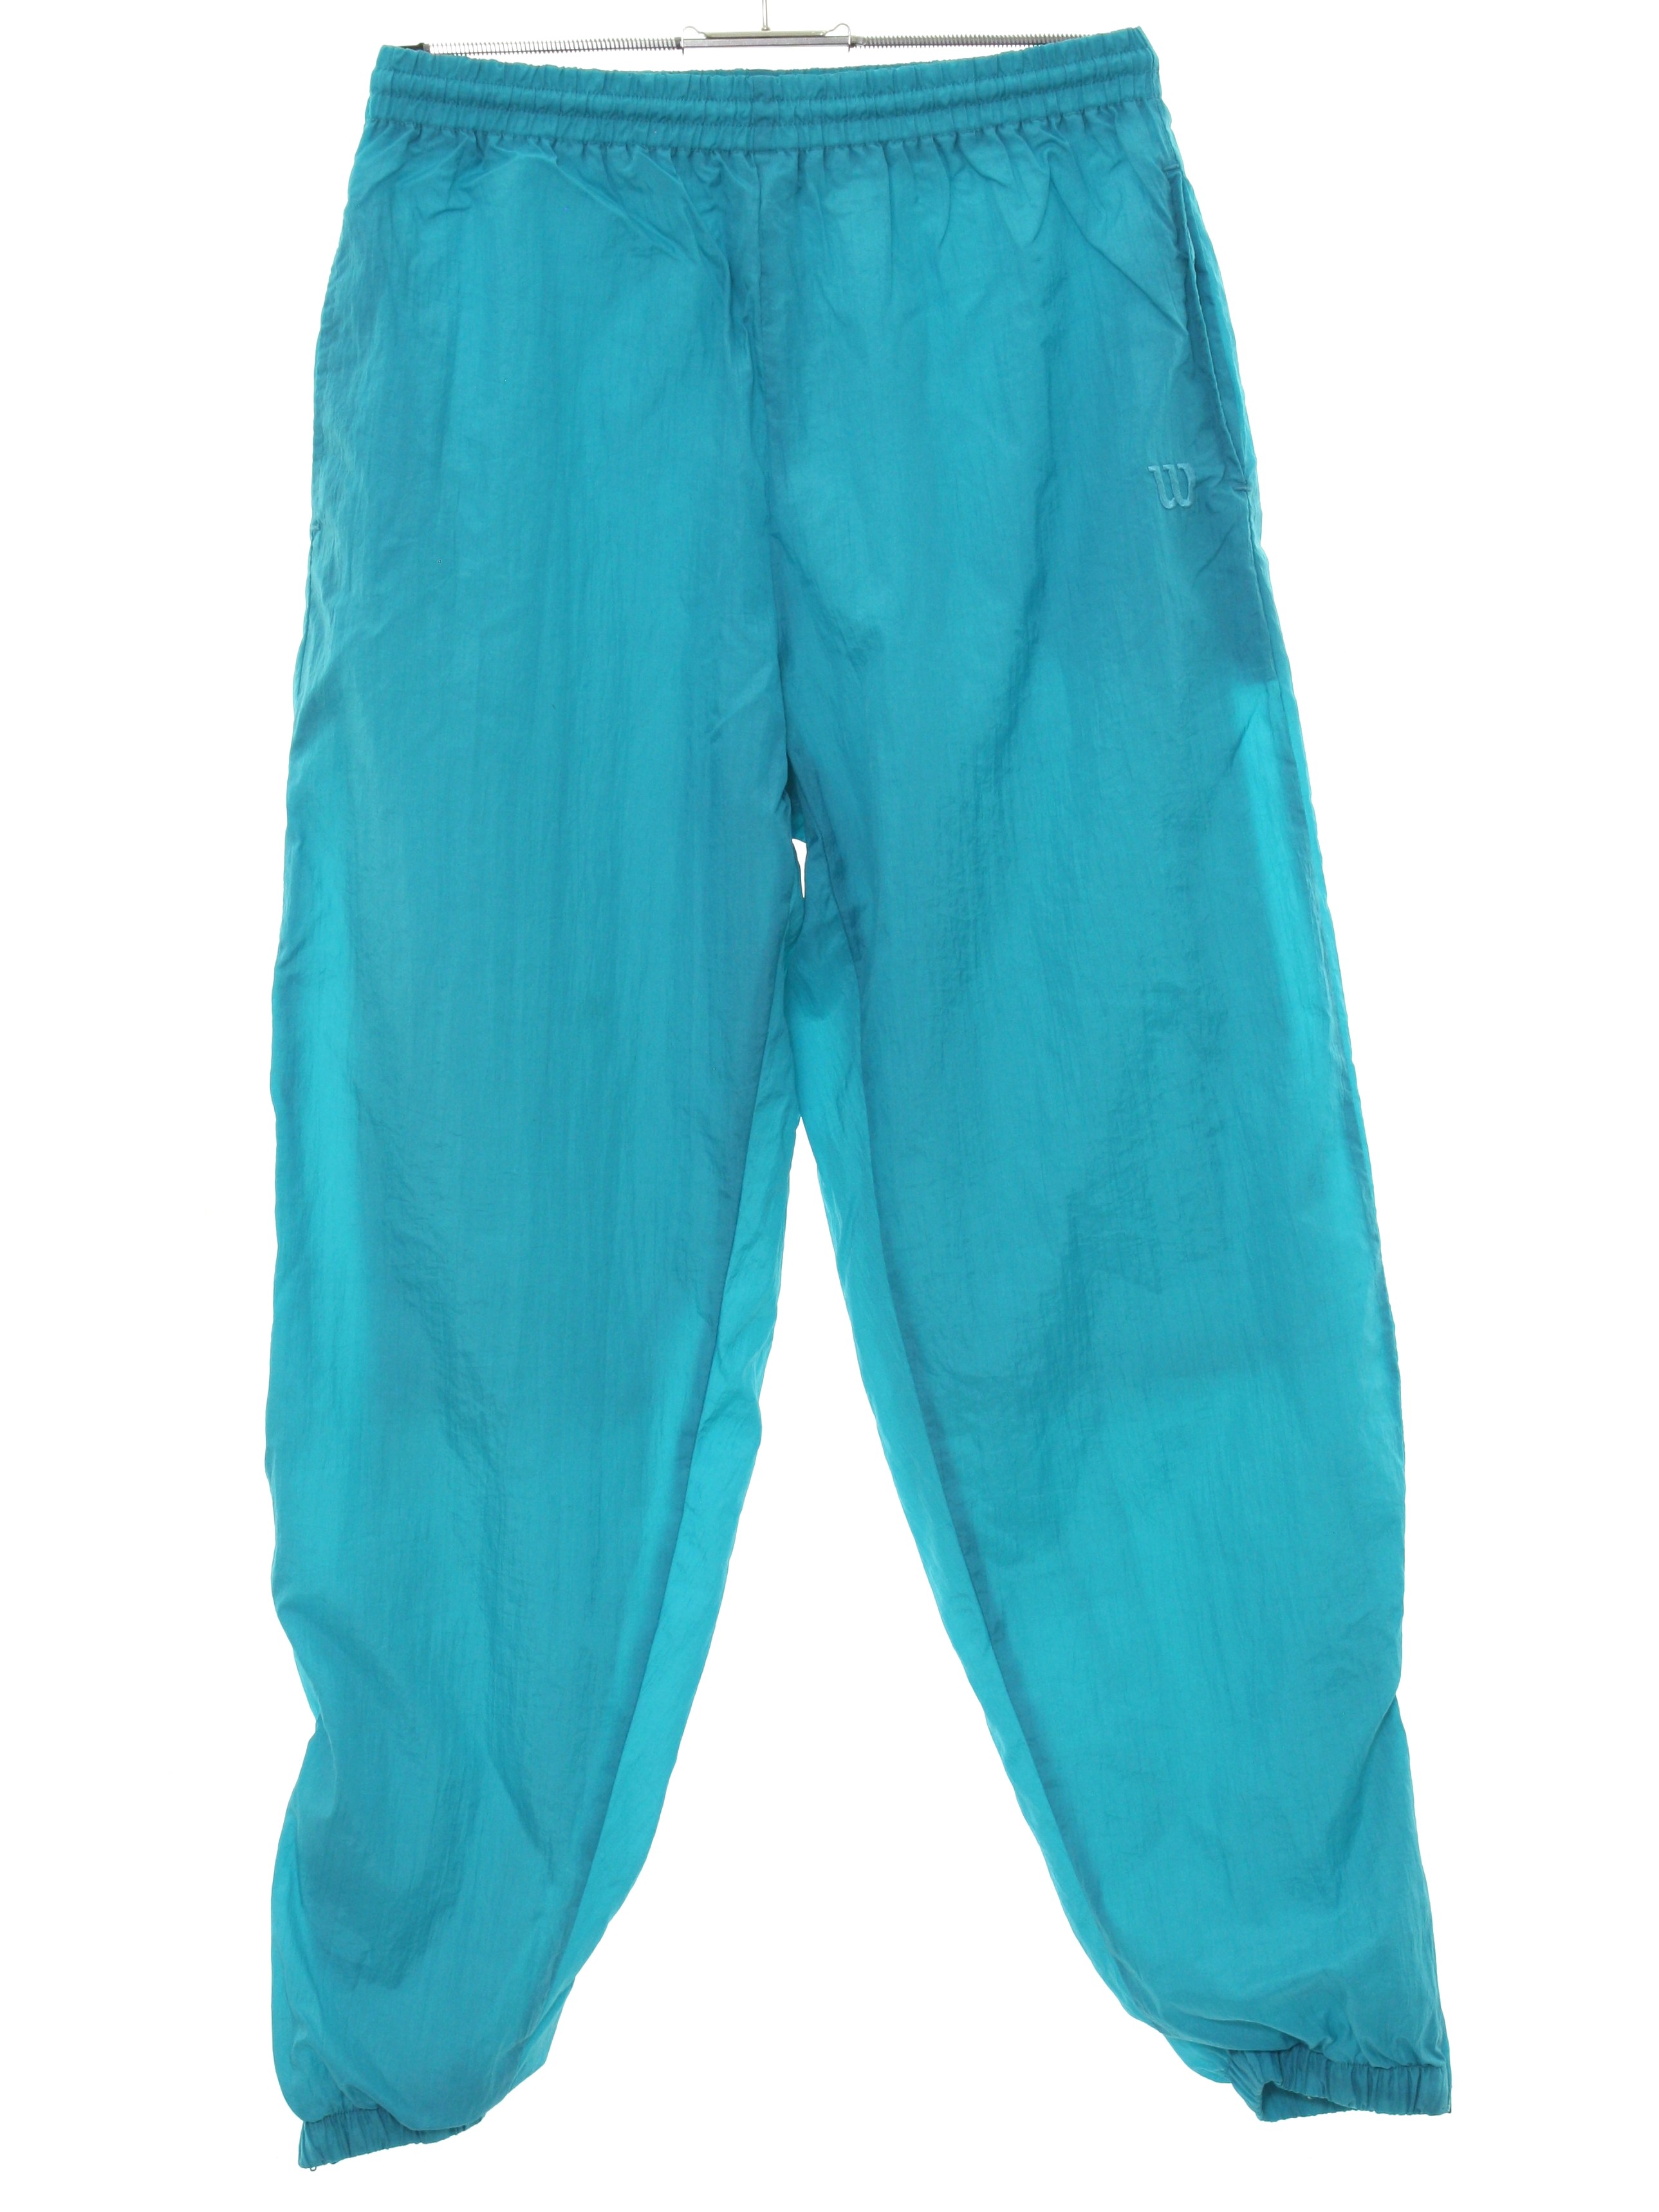 Retro Eighties Pants: 80s style (made in 90s) -Wilsons- Womens bright aqua  green solid colored nylon flat front, slightly tapered leg baggy track pants  with elastic cuff hem with ankle zipper, inset